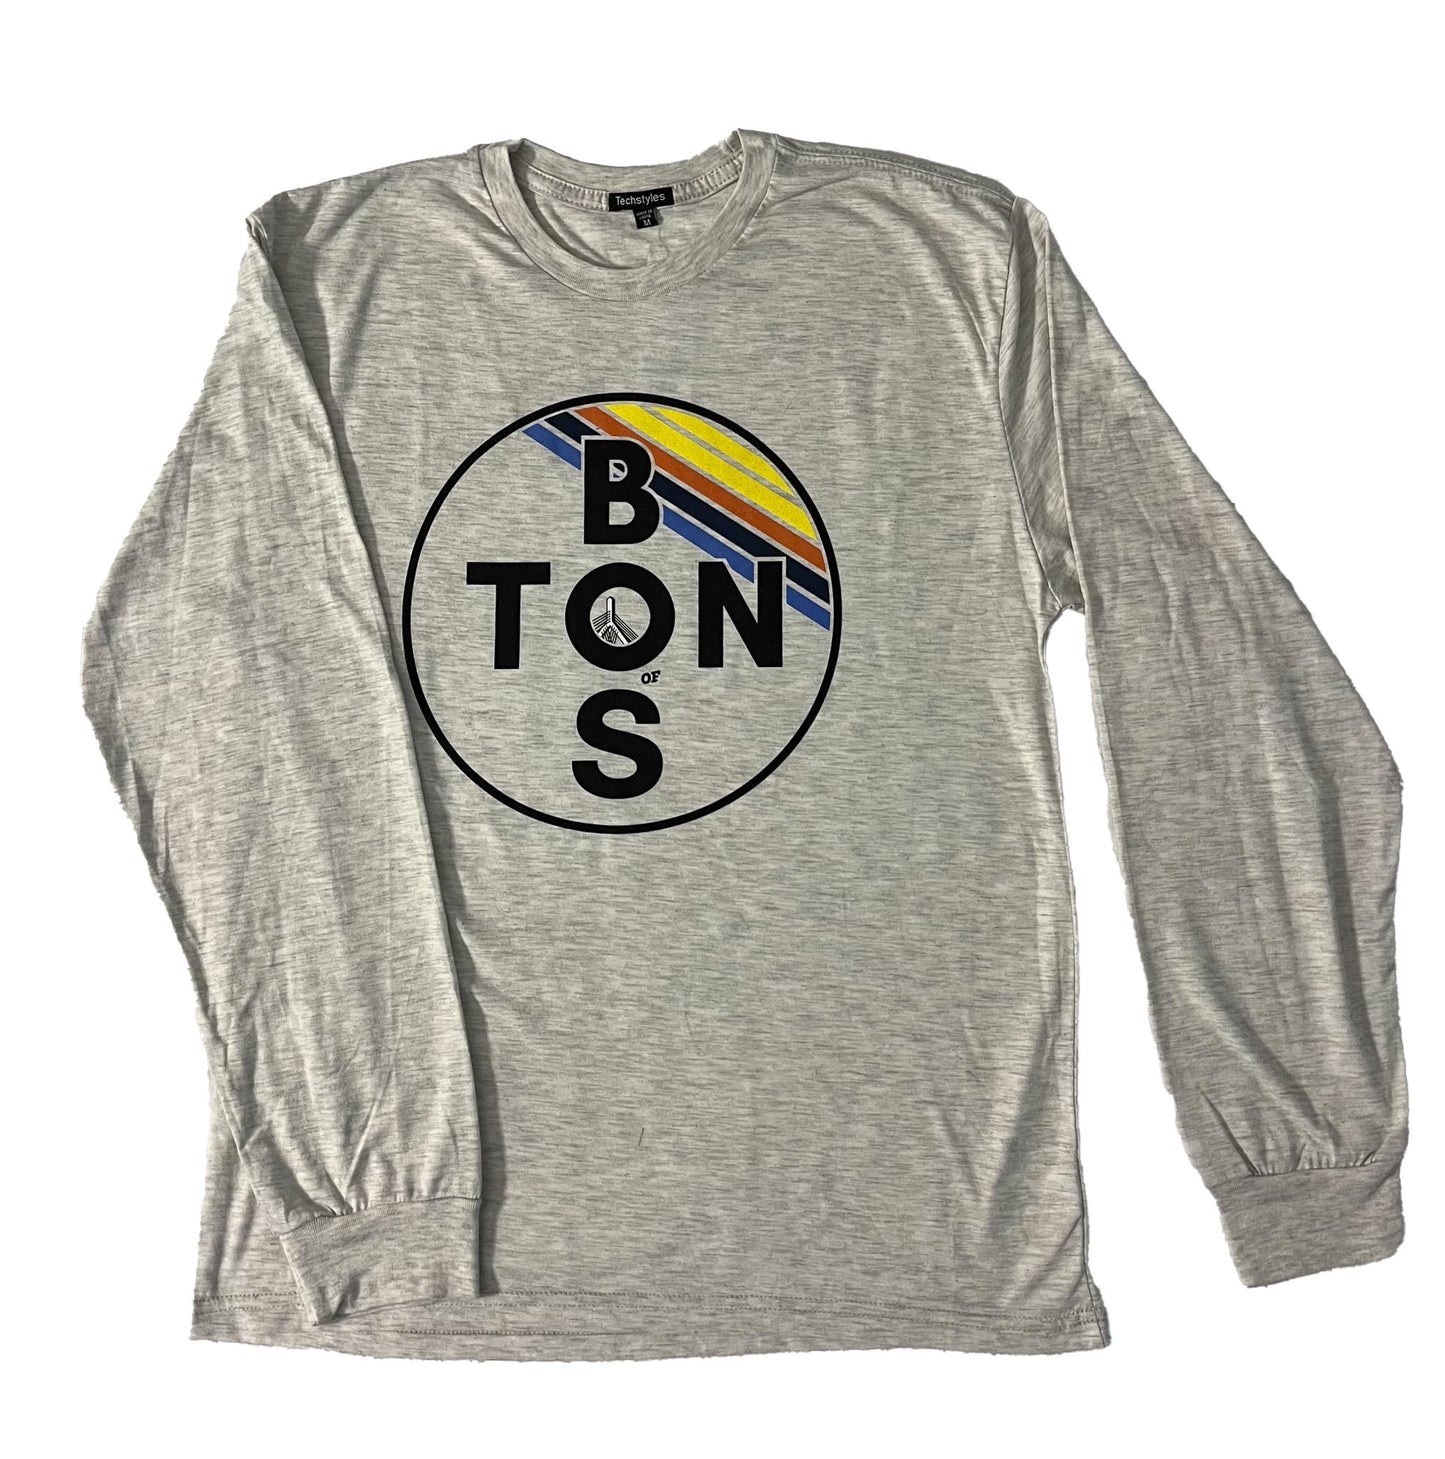 The Seaport Long Sleeve